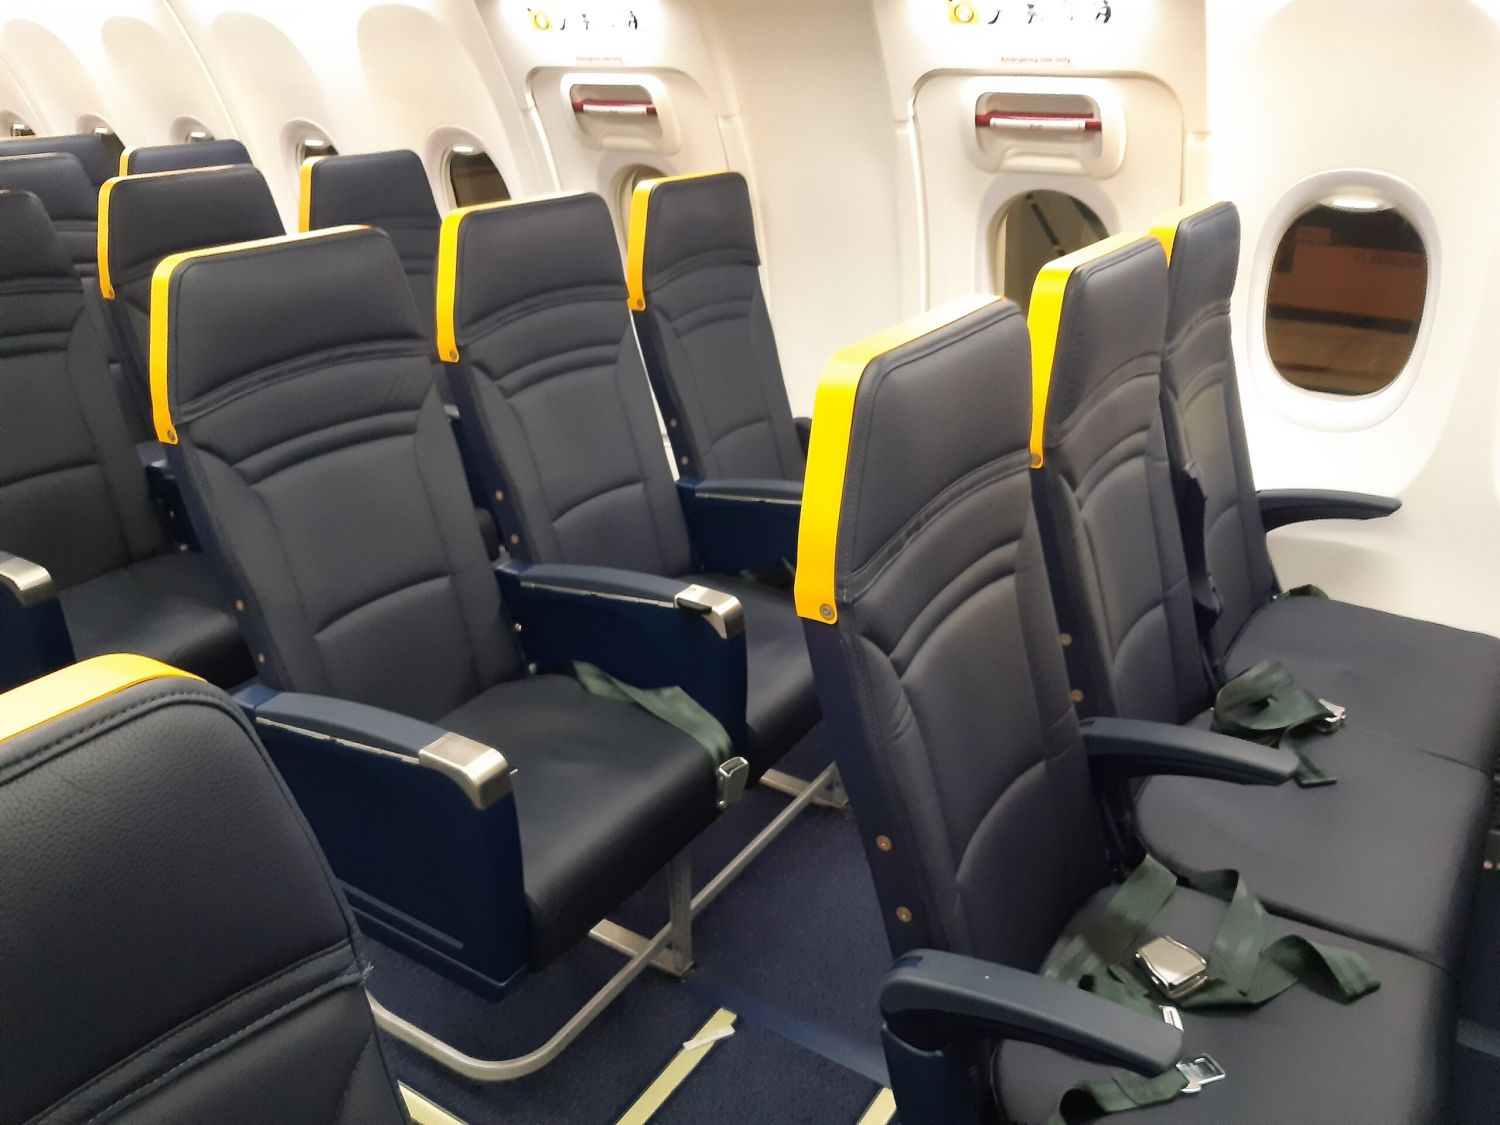 Flying Ryanair S Gamechanger 737 Max 8200 197 Seats And A Consistent Experience Aviacionline Com